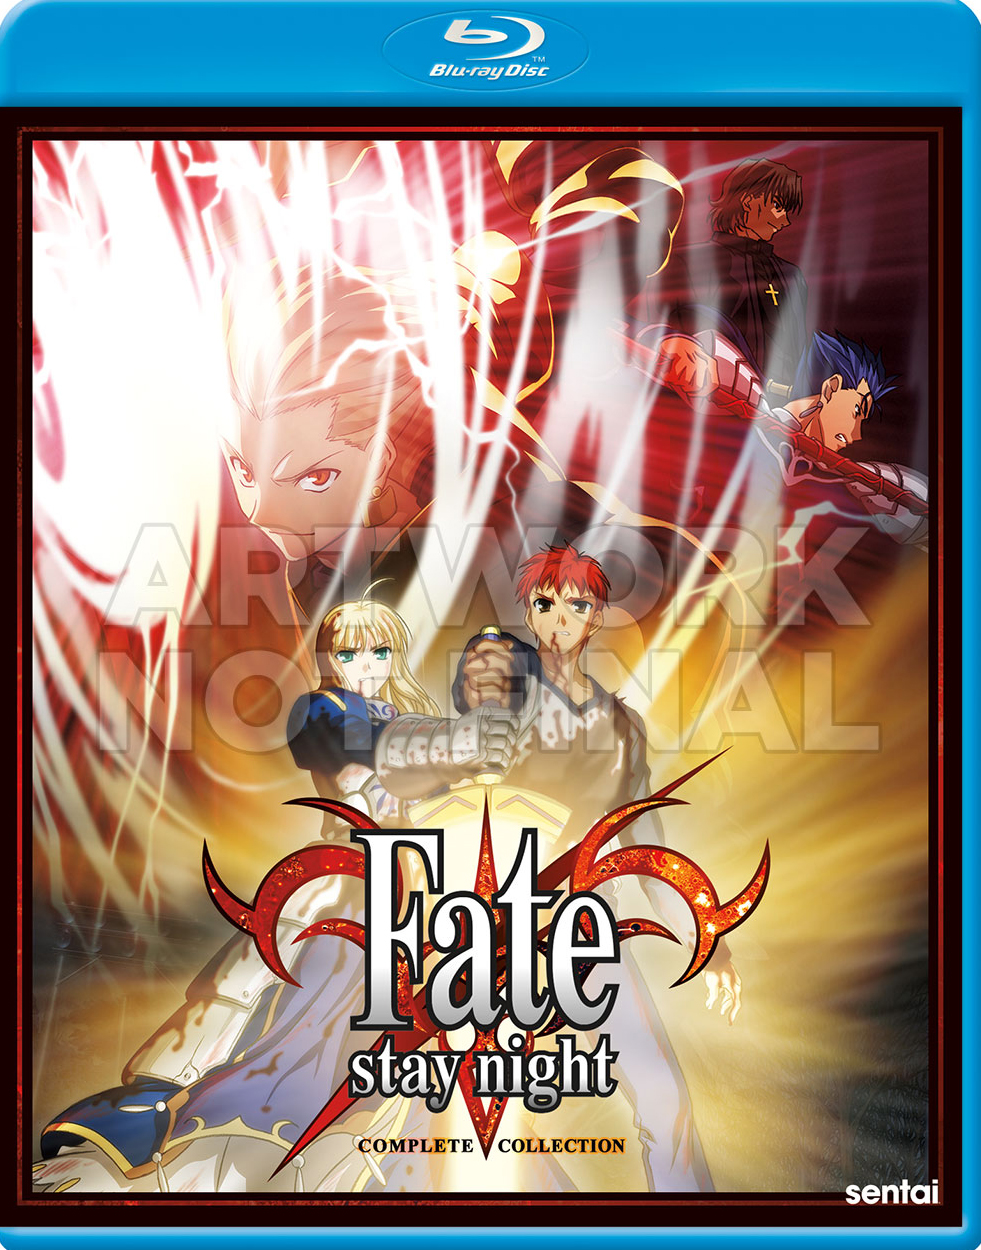 

Fate/Stay Night: Complete Collection [Blu-ray] [3 Discs]